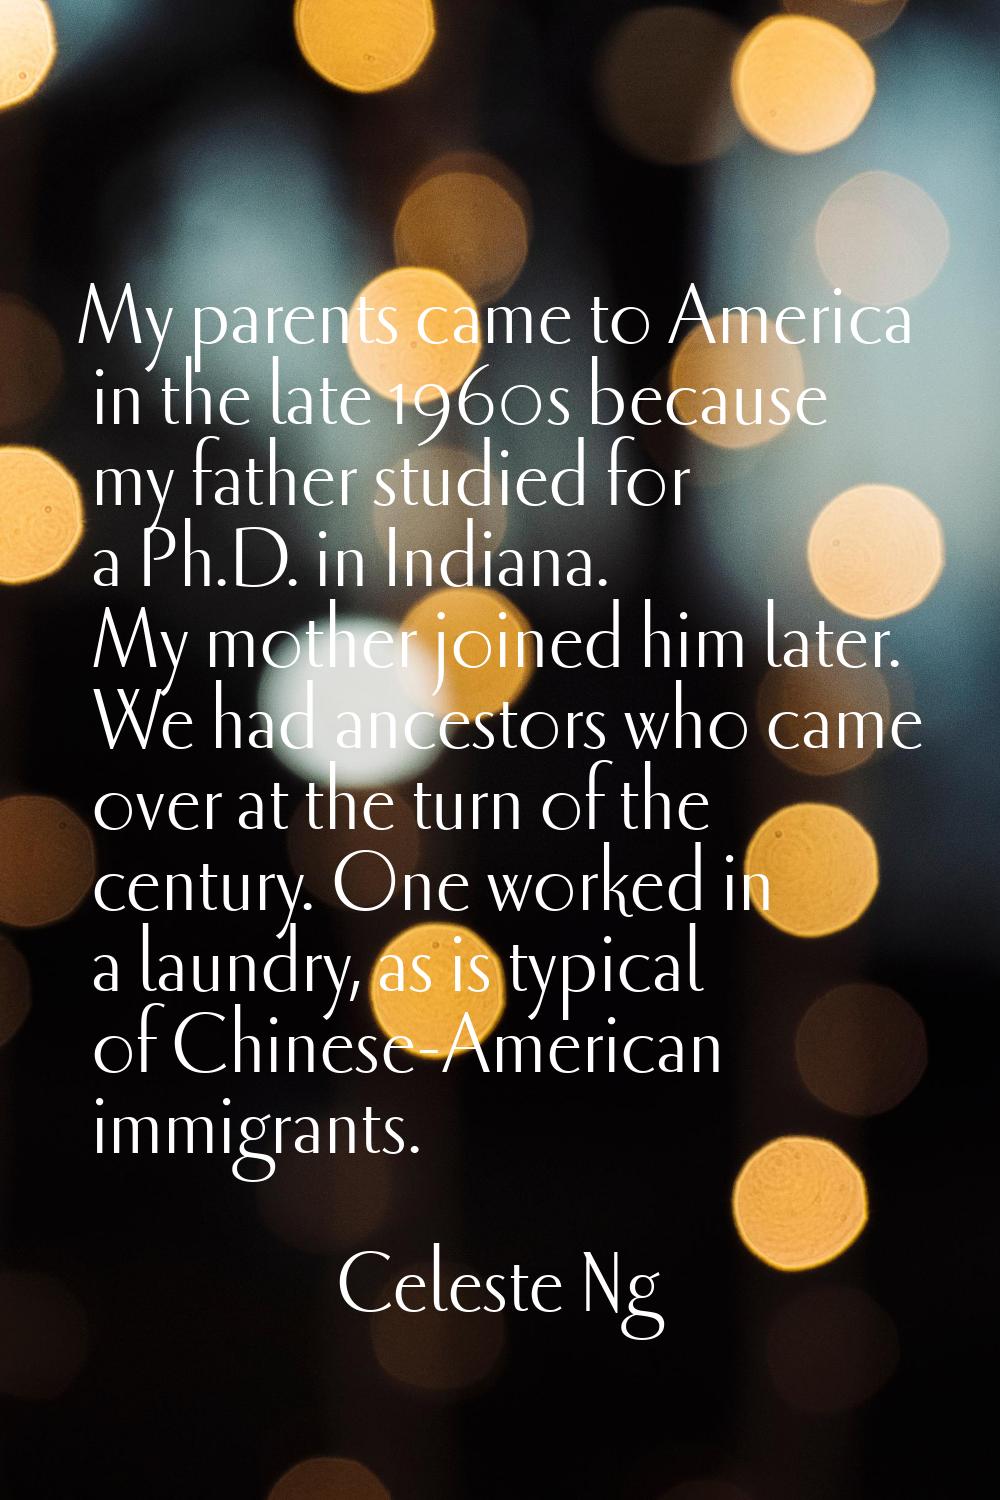 My parents came to America in the late 1960s because my father studied for a Ph.D. in Indiana. My m